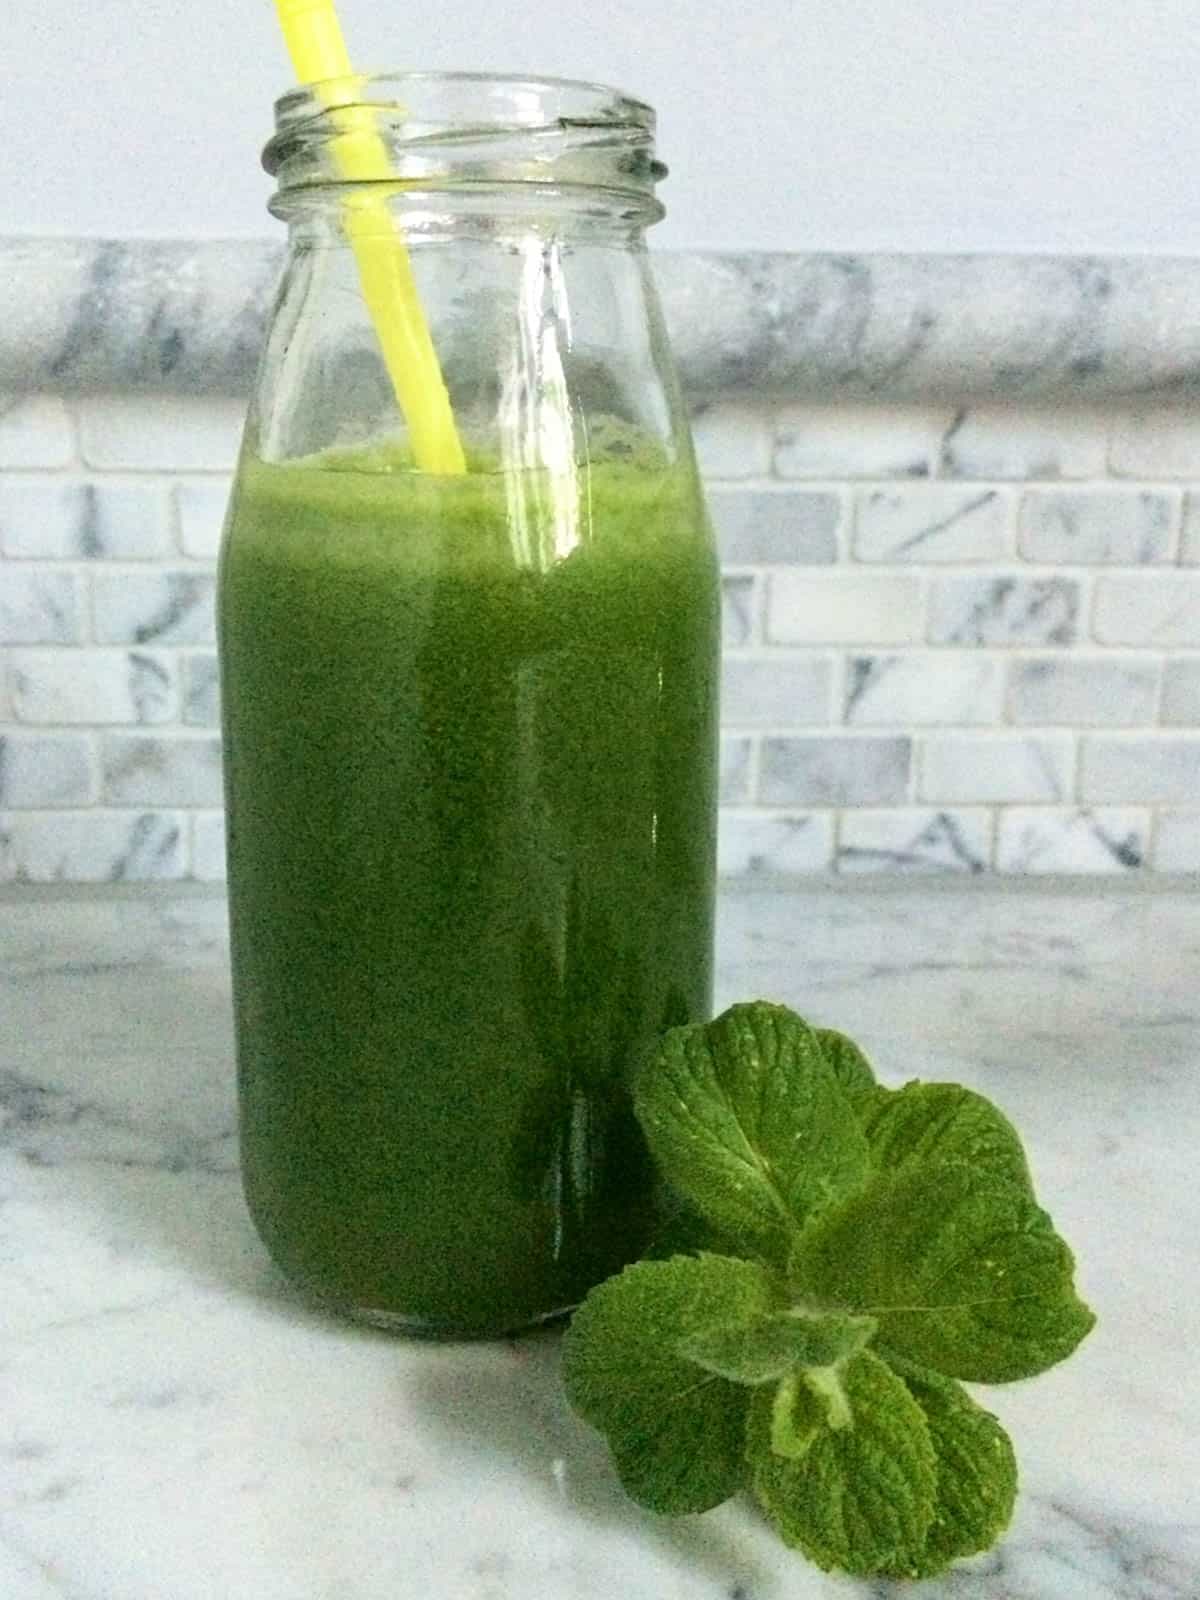 Bottle of green juice with yellow straw and mint sprig.